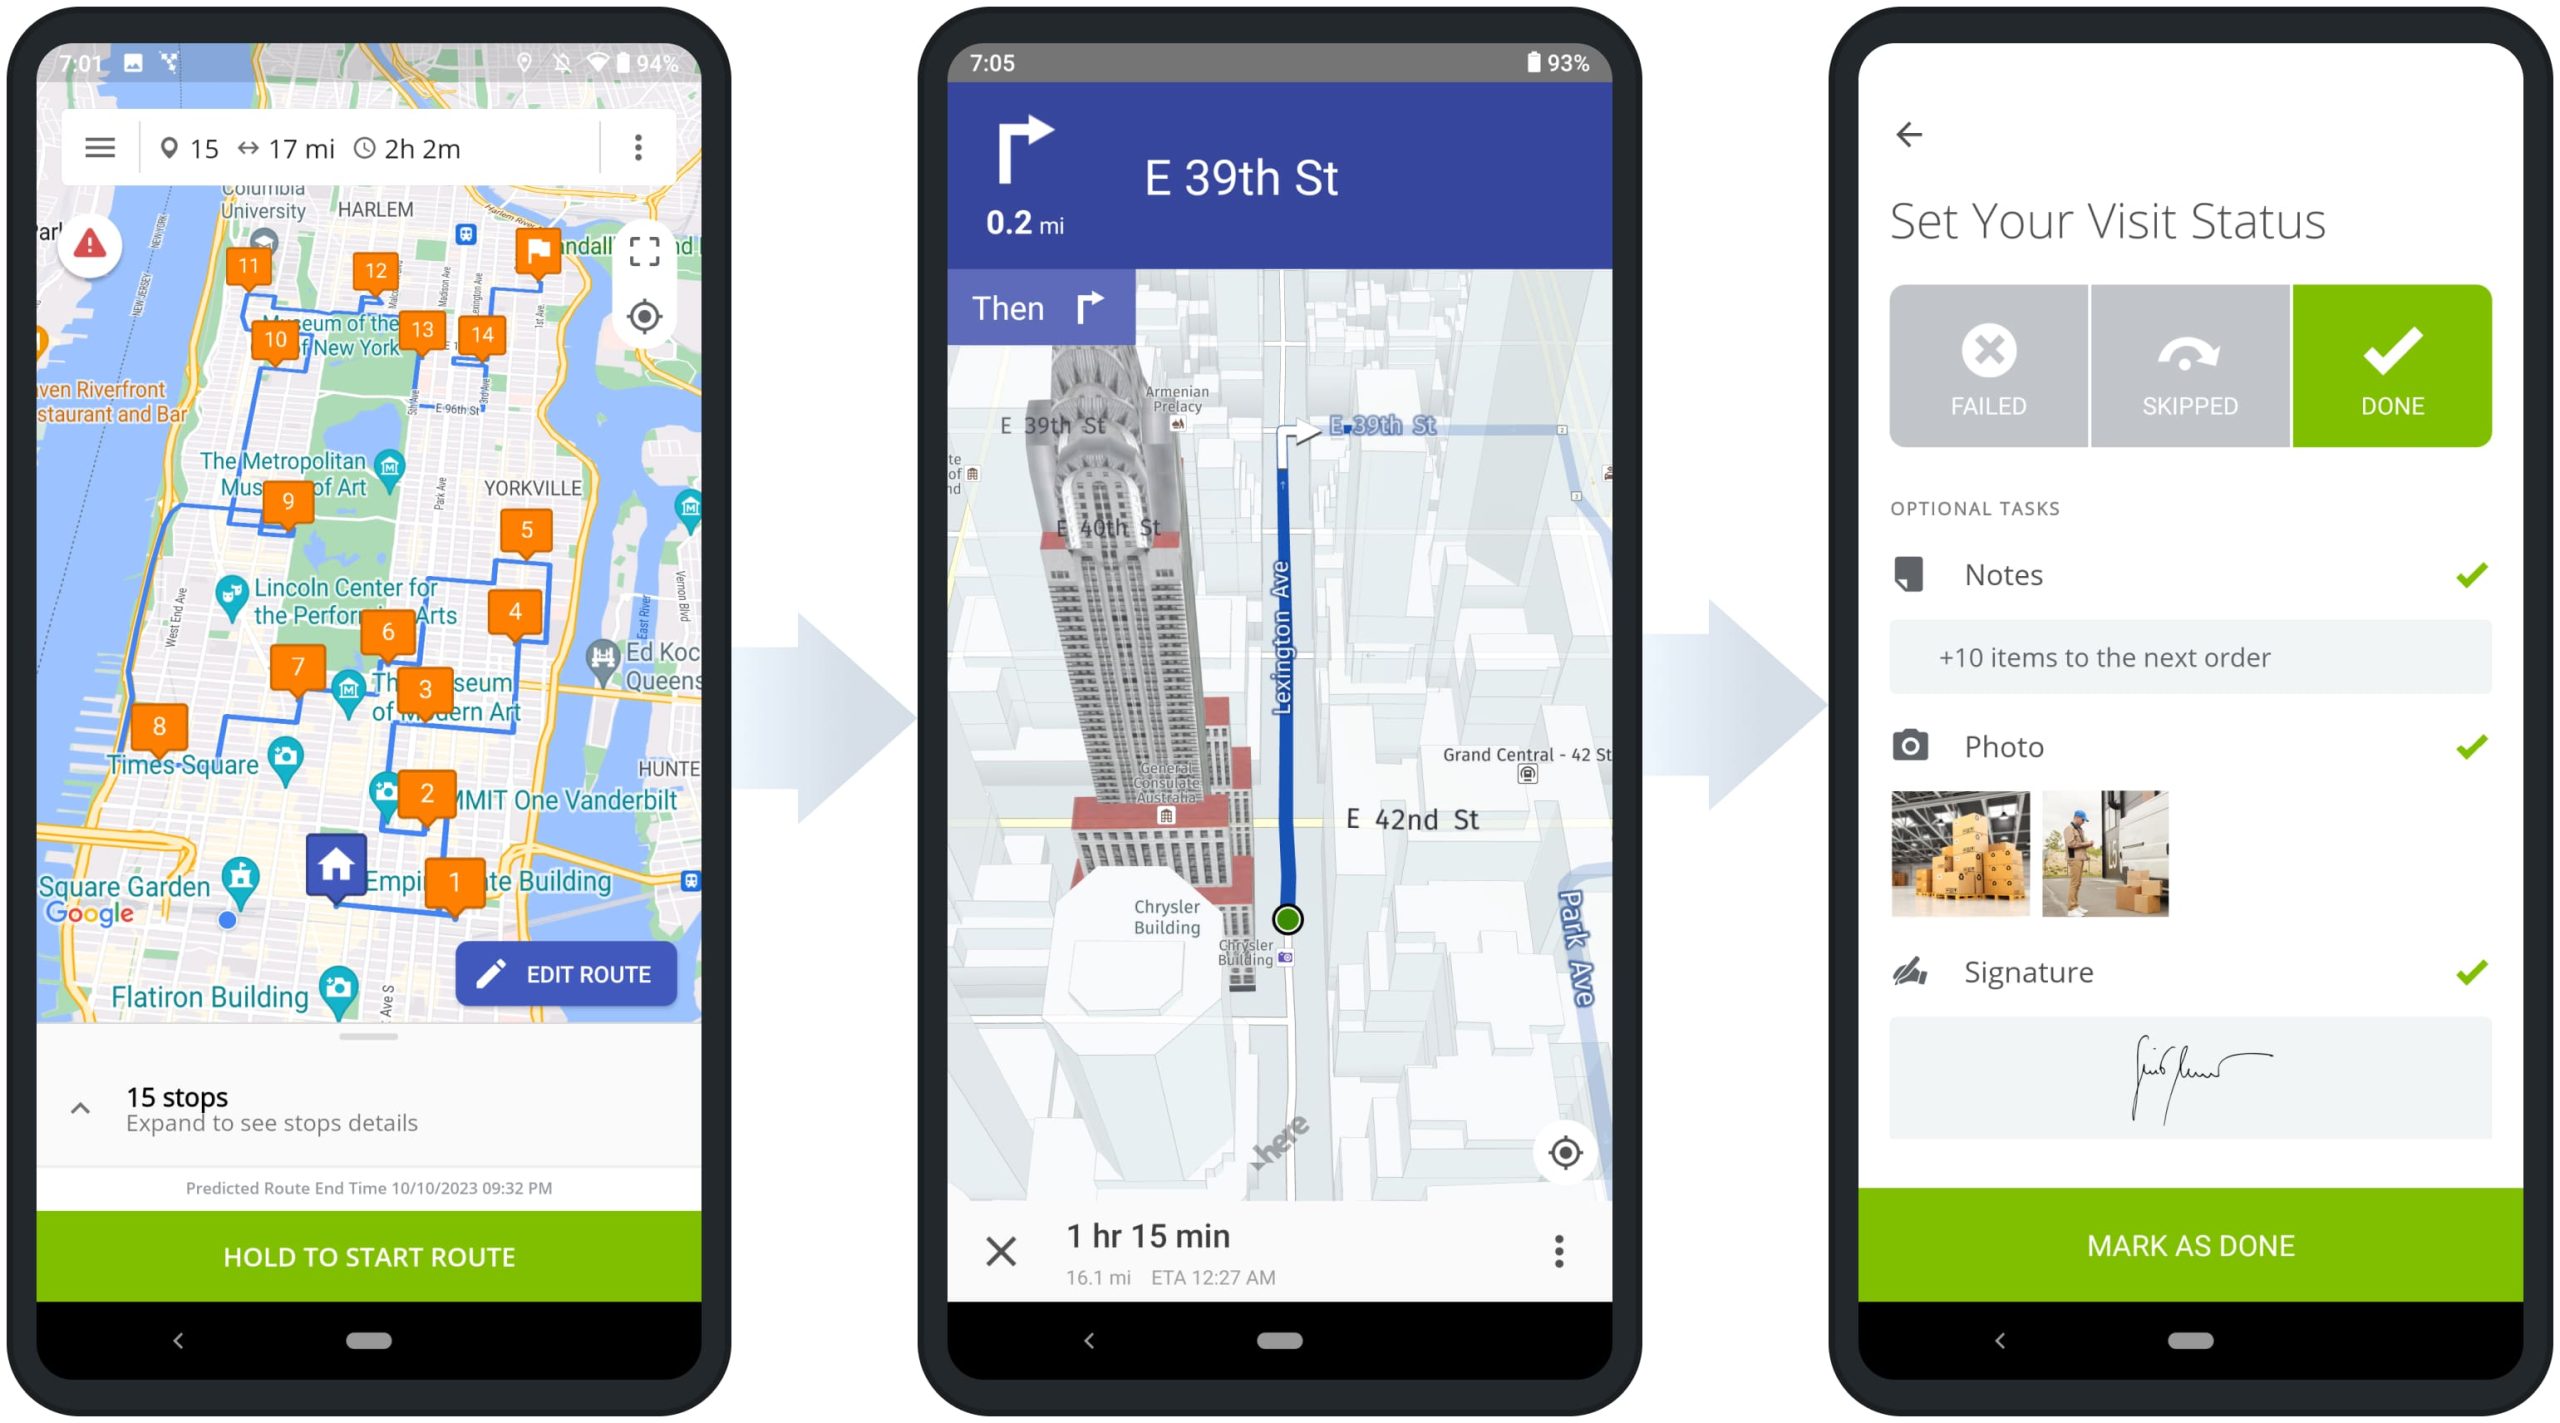 Attach proof of visit, delivery, or service offline to route stops using Android Route Planner app with no internet connection.